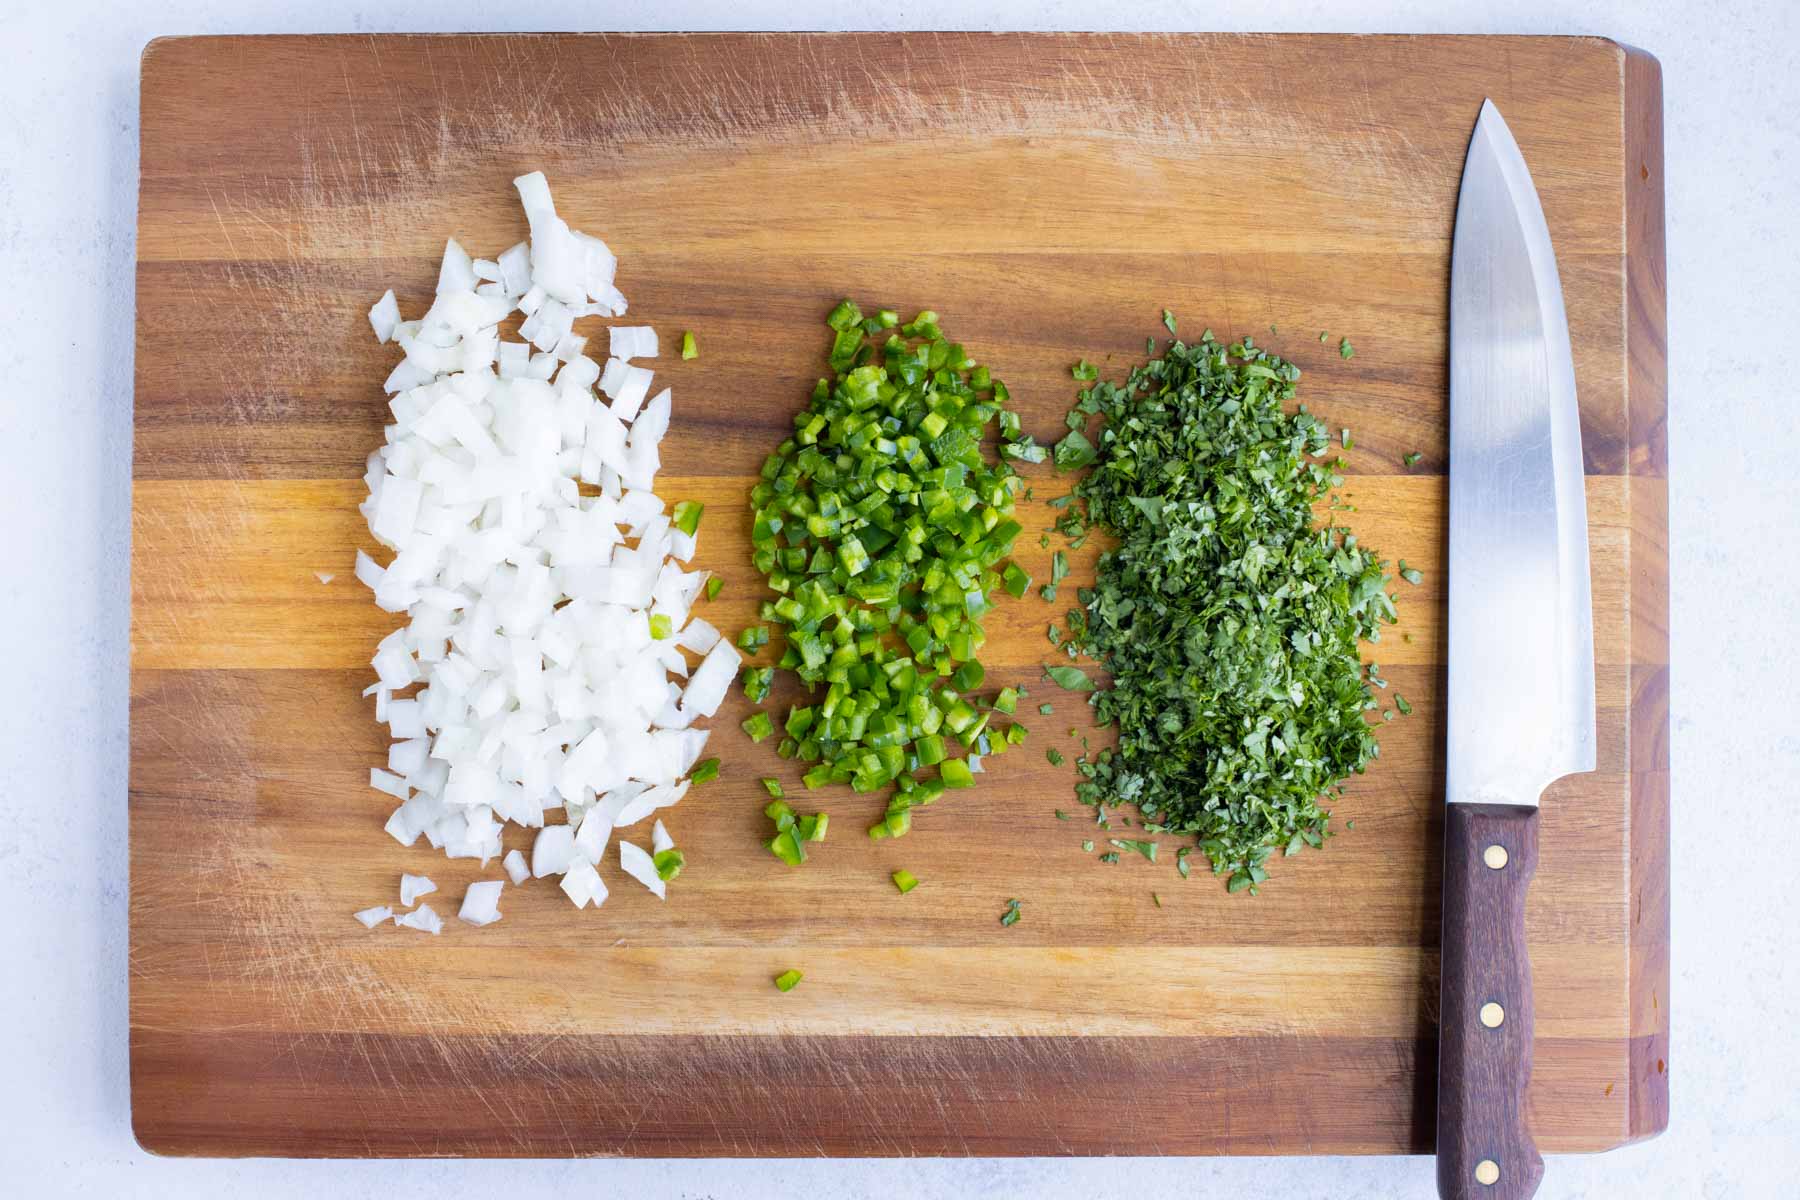 Cilantro, onion, and jalapeno are diced into small pieces.